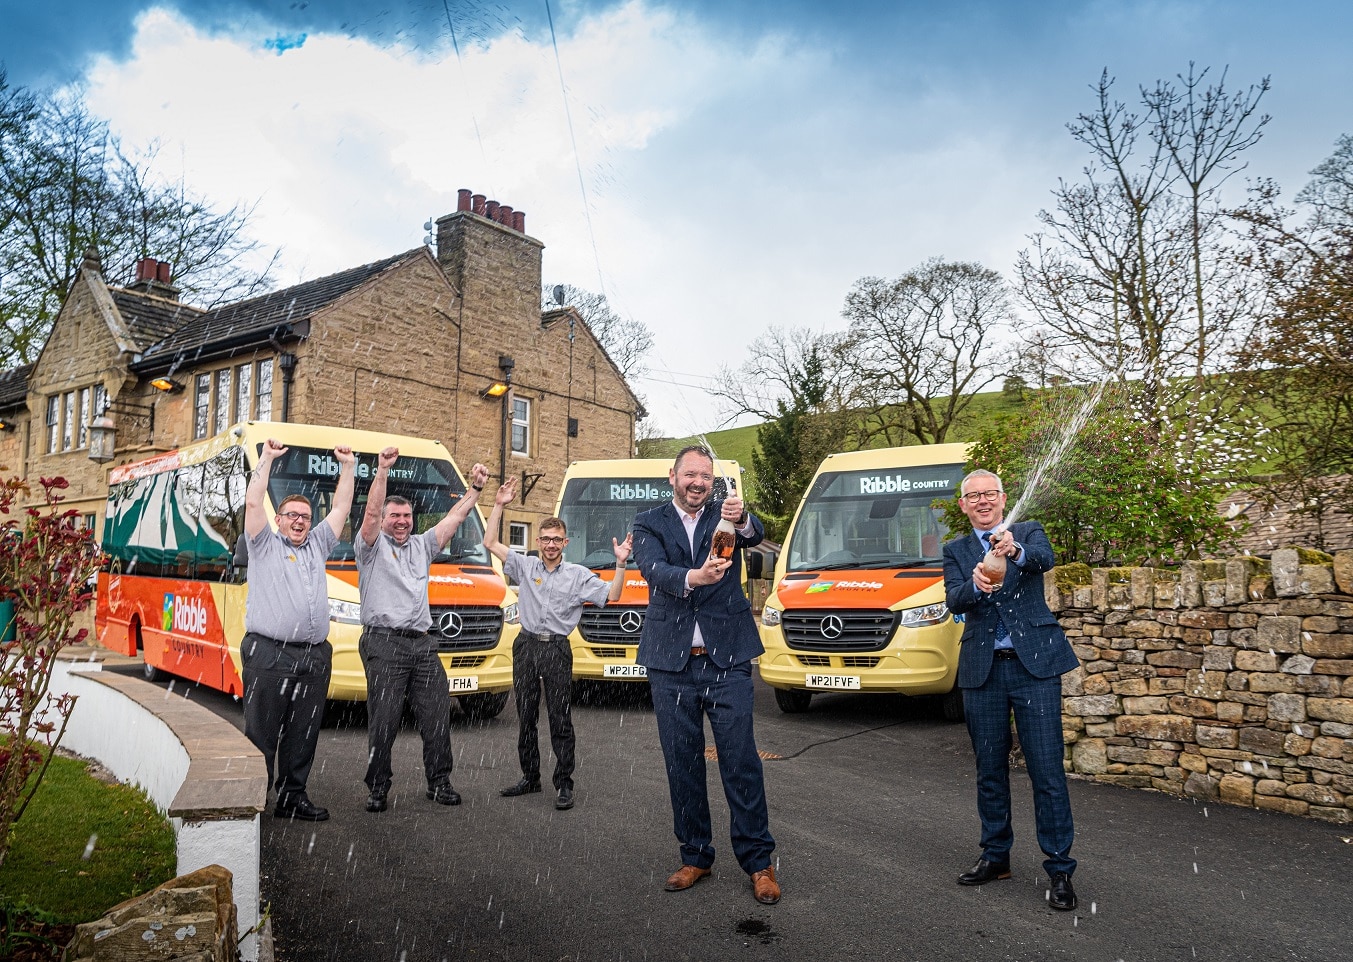 Ribble Country network launched by Transdev Blazefield